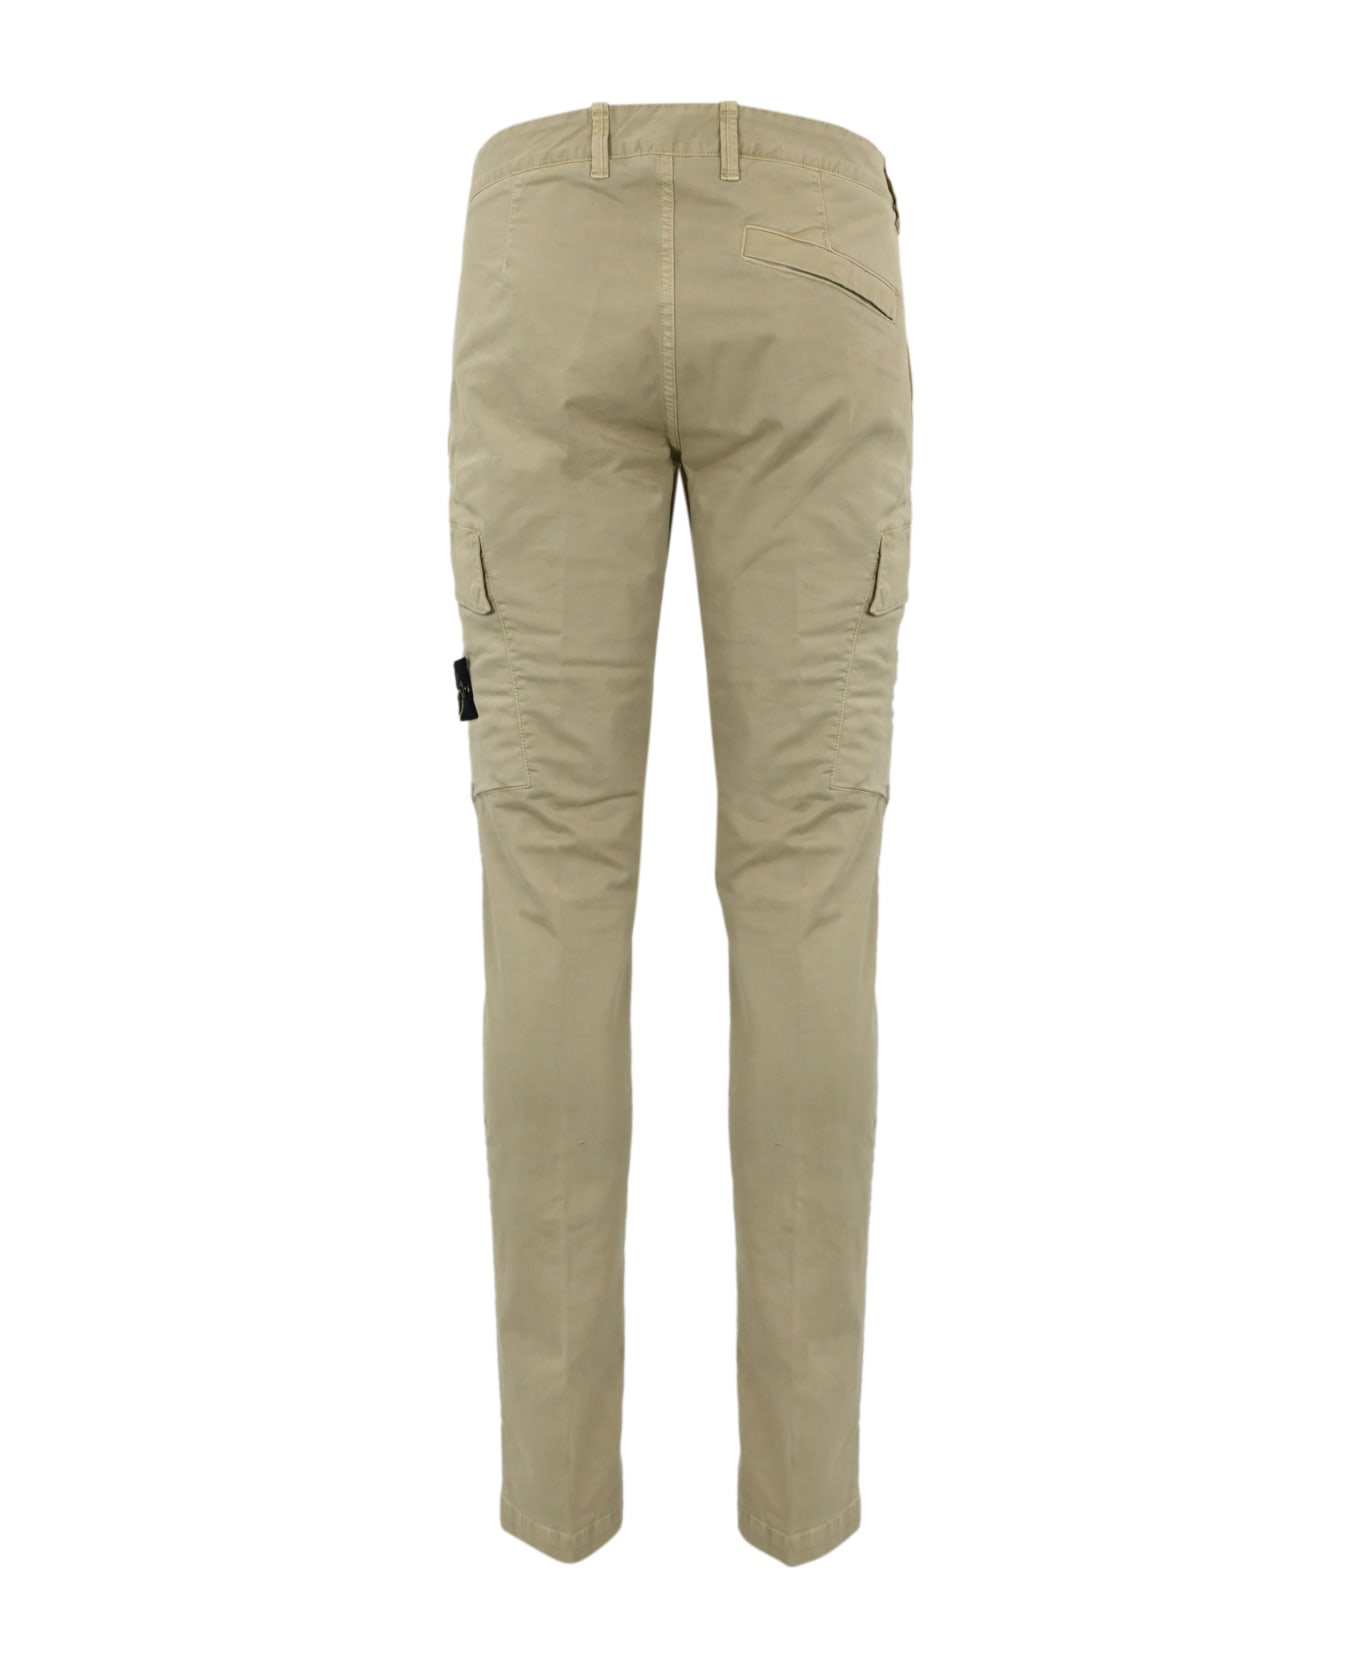 Stone Island Cargo Trousers 30604 Old Treatment - SAND